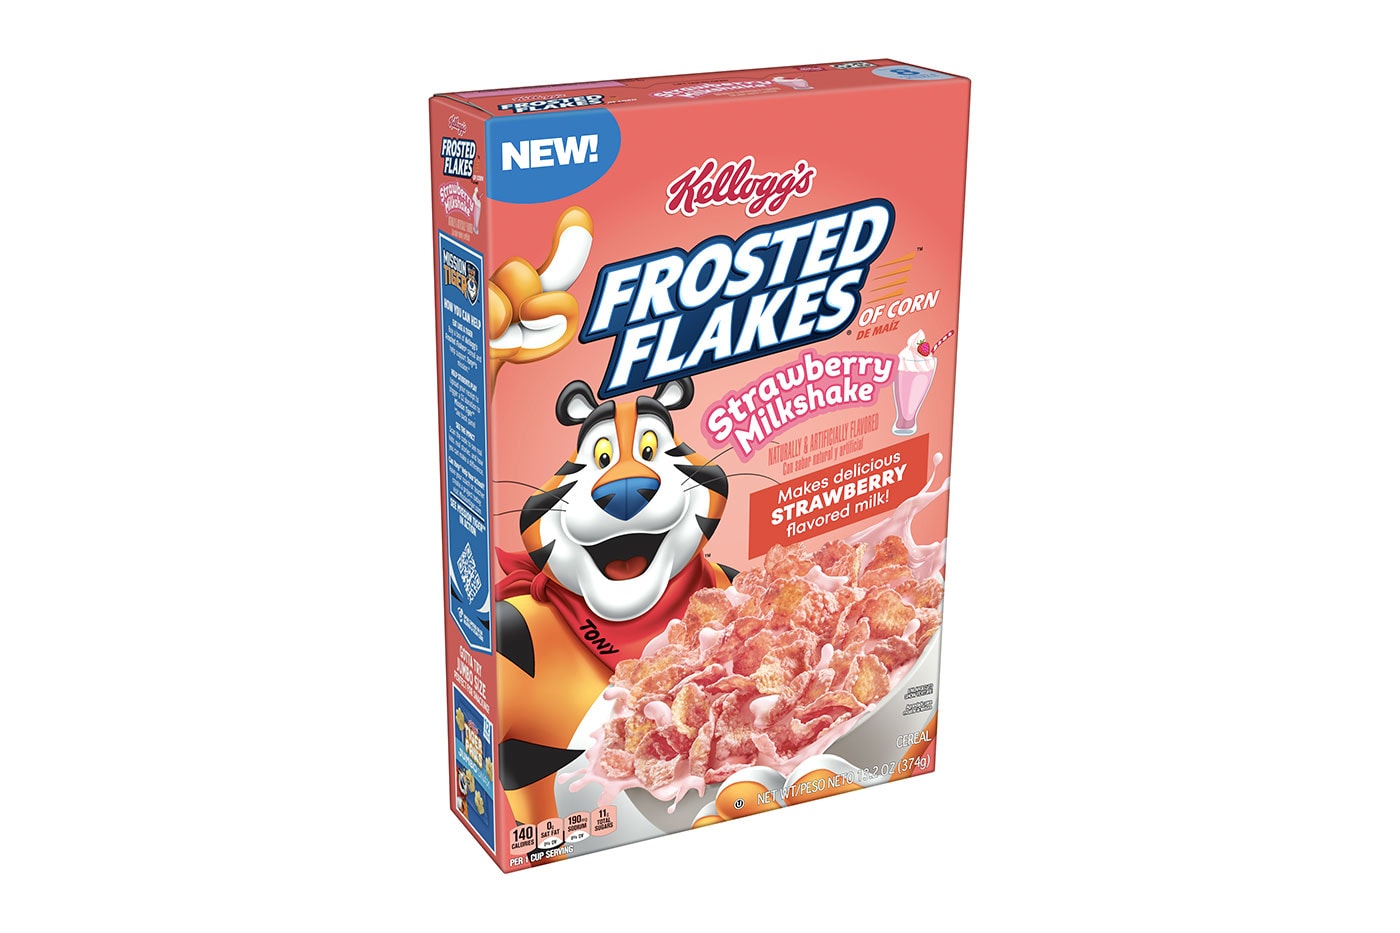 Kellogg's Releases Three New Frosted Flakes Cereal Flavors strawberry milkshake cinnamon french toast chocolate tony the tiger they're great